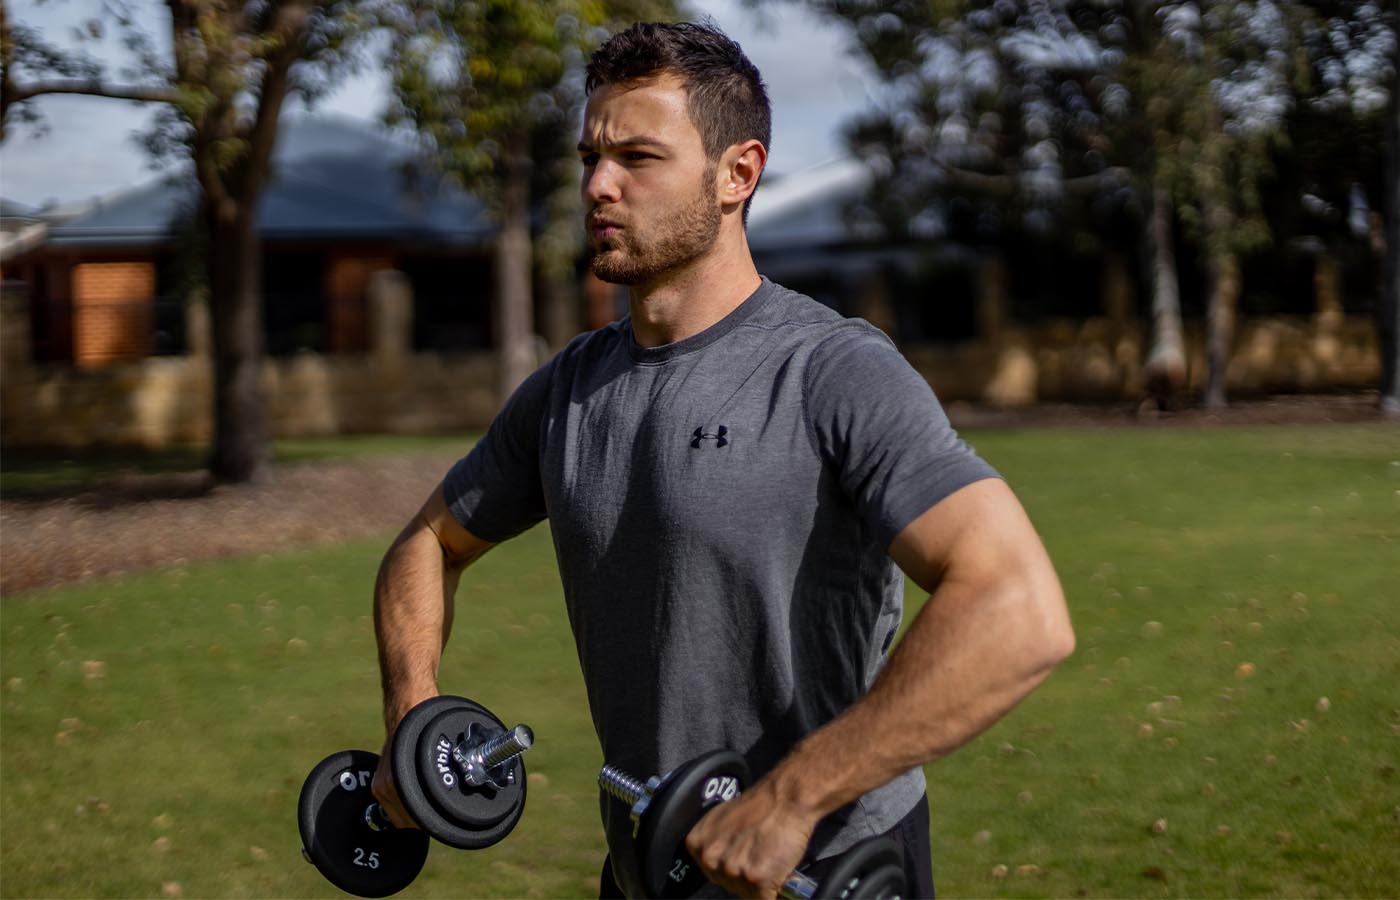 A male athlete performing free weight shoulder exercises with a pair of dumbbells